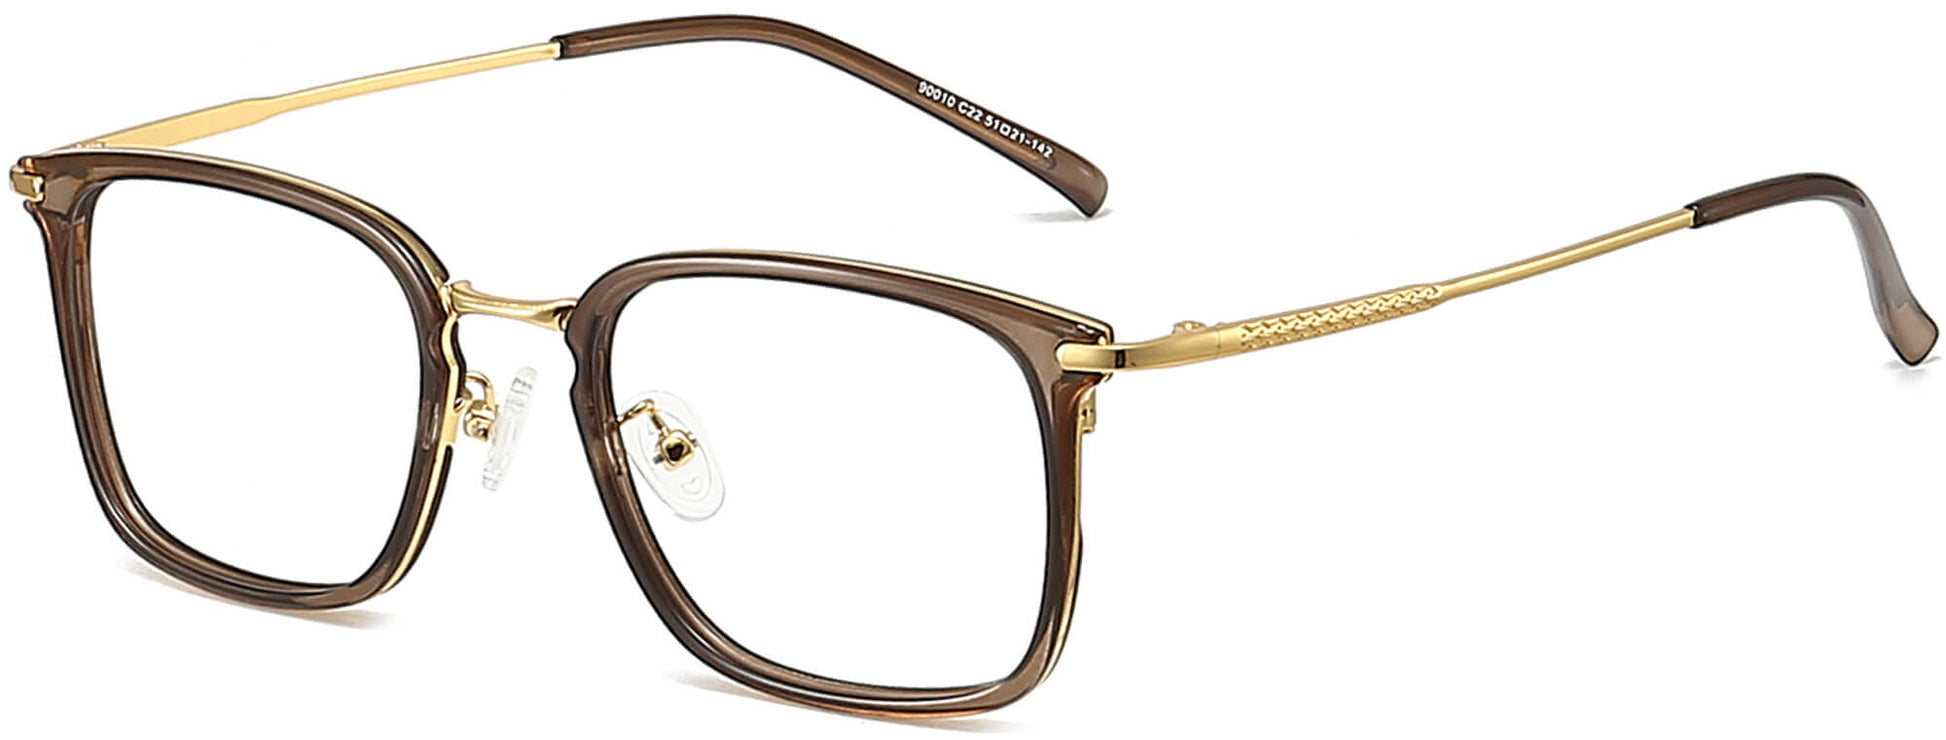 Nehemiah Square Brown Eyeglasses from ANRRI, angle view